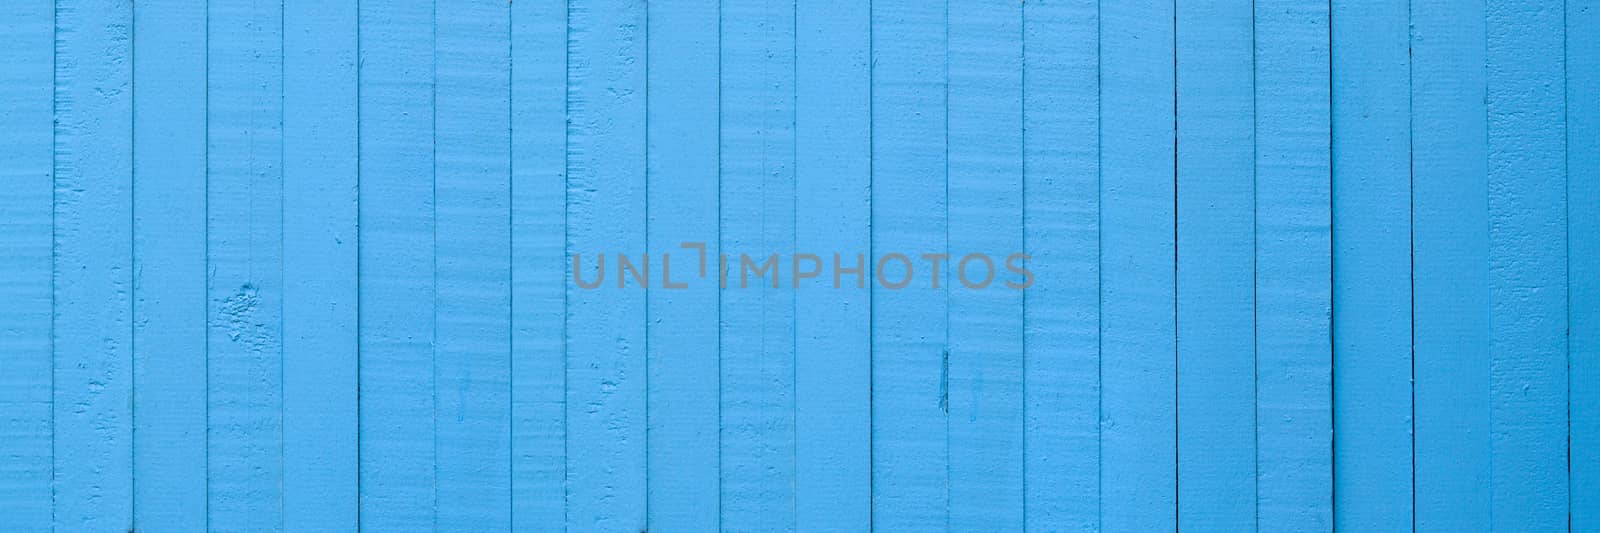 Blue wood plank banner background. Blue wood background. by Eungsuwat